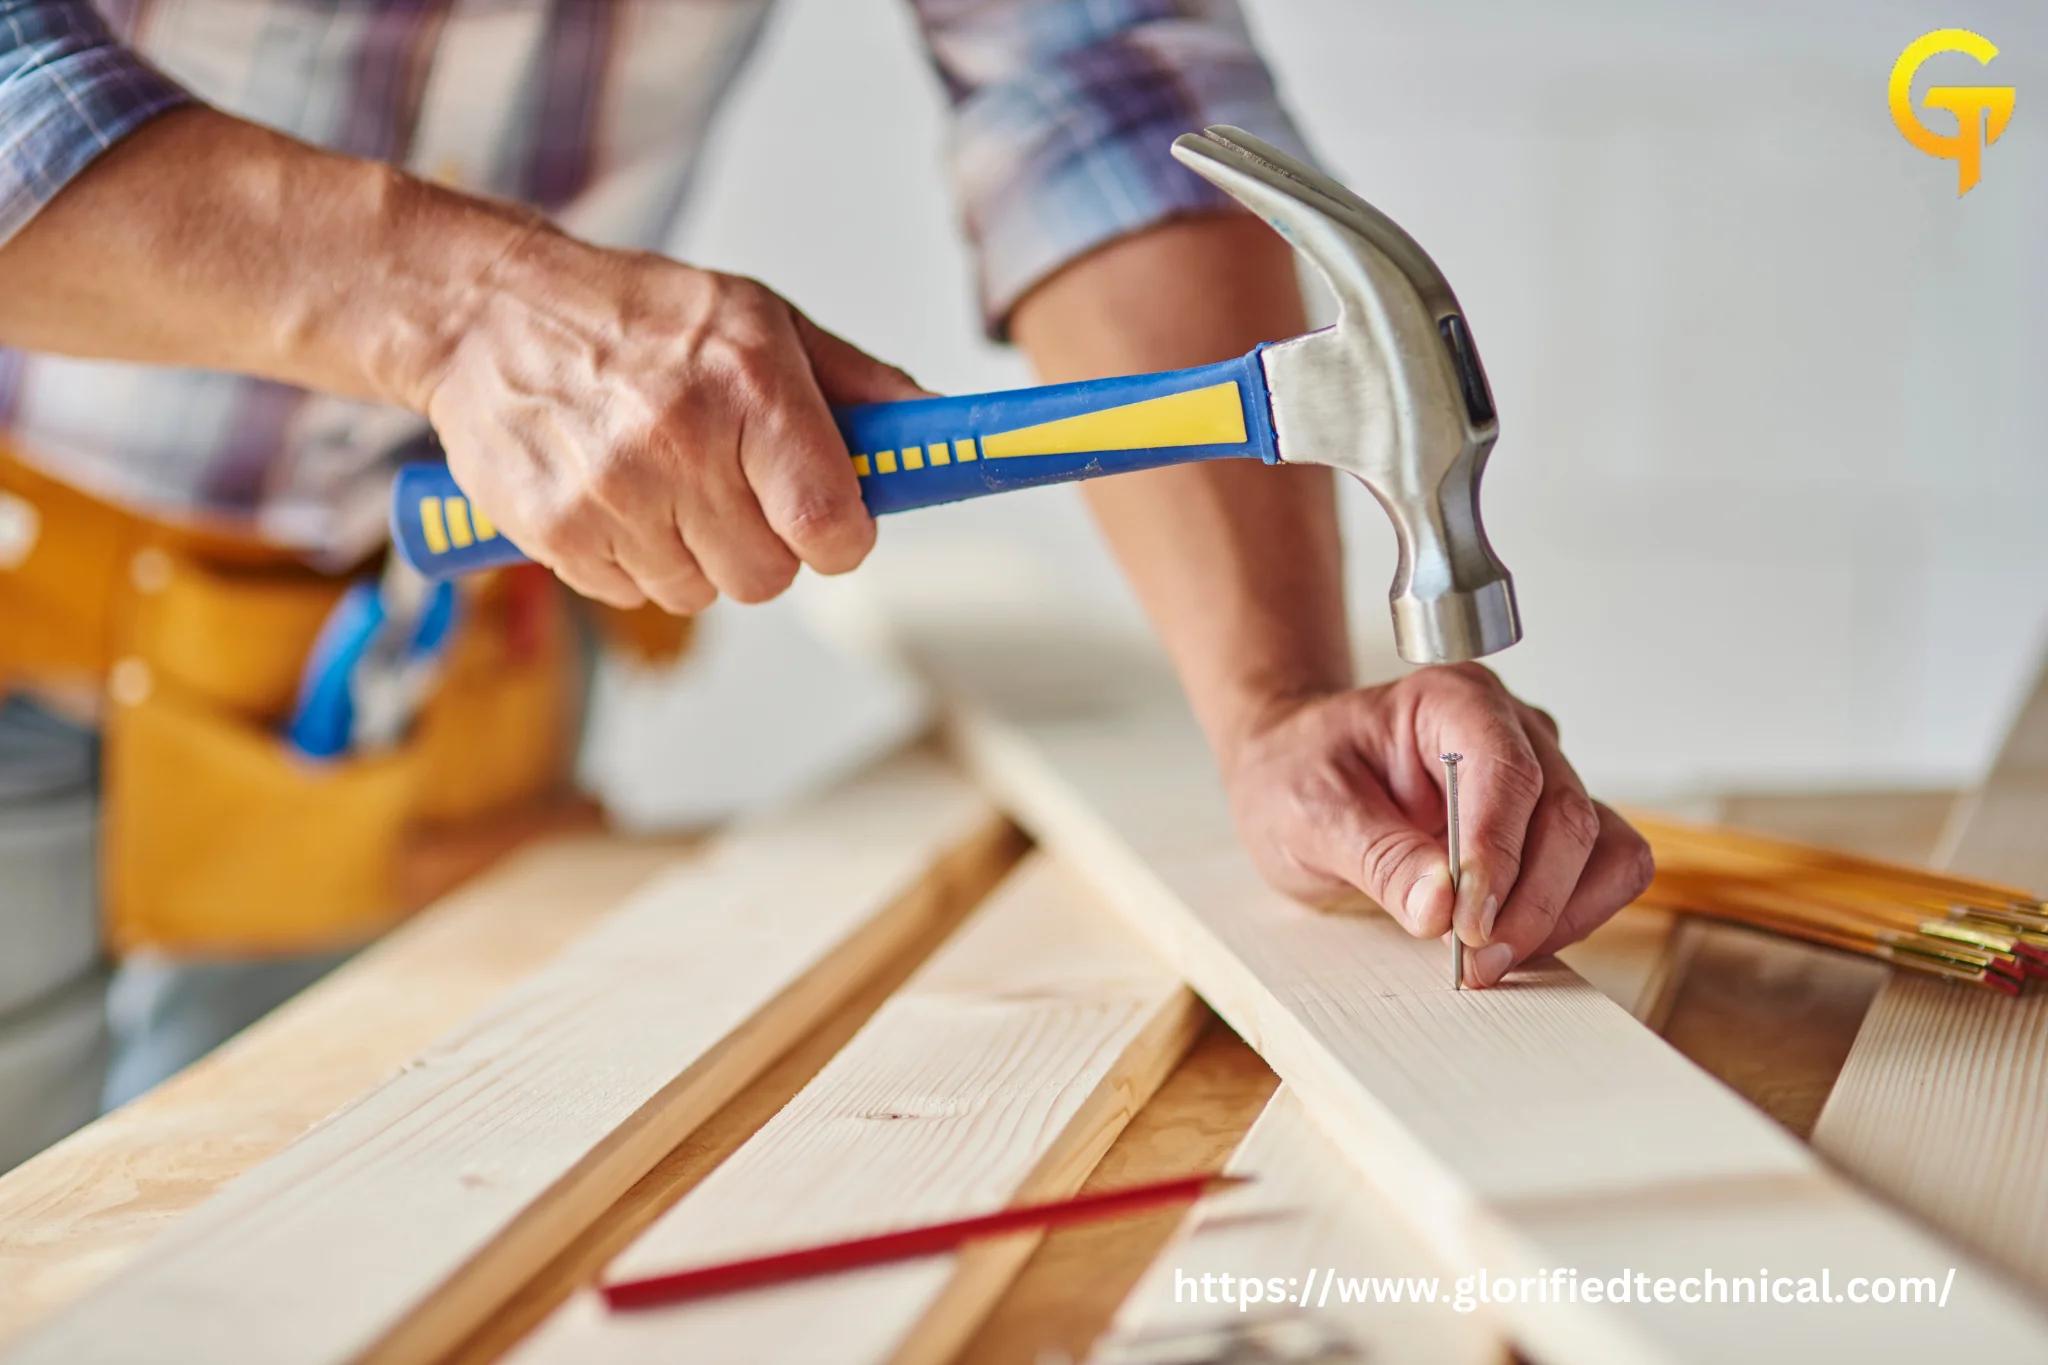 How Can I Find the Best Carpentry Services in Dubai?